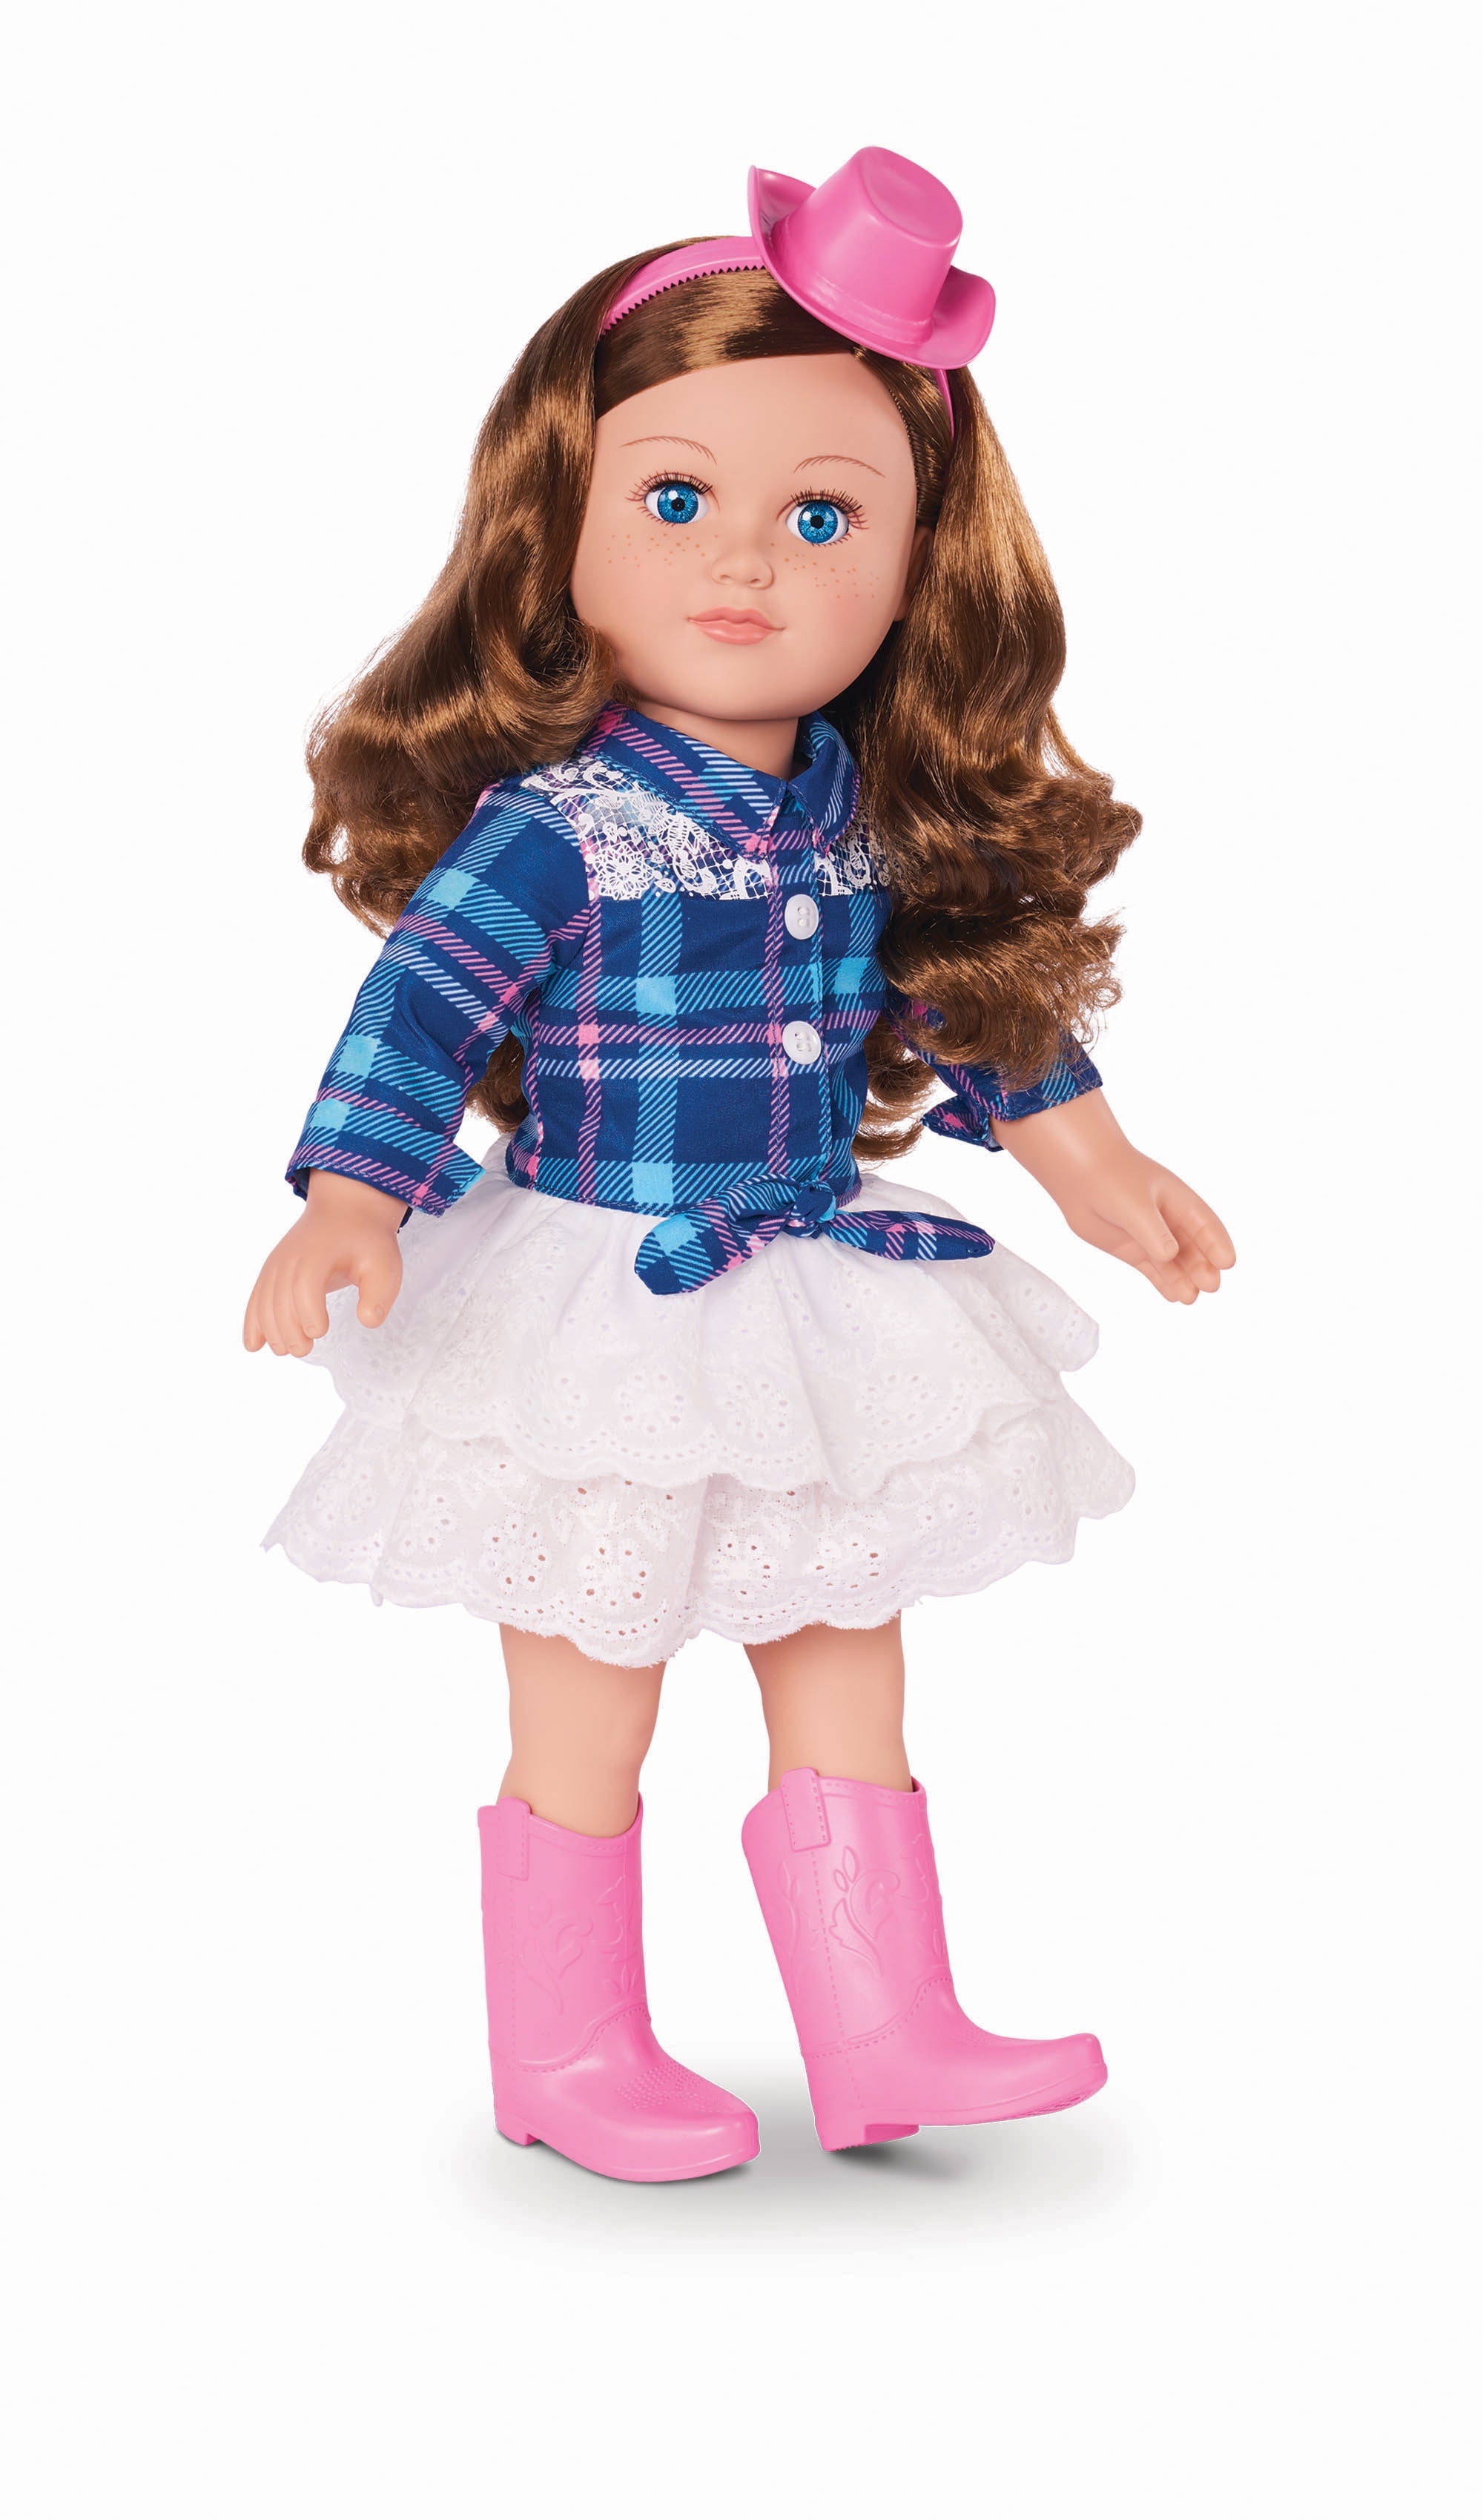 18" COWGIRL DOLL BRUNETTE BLUE EYES MY LIFE AS